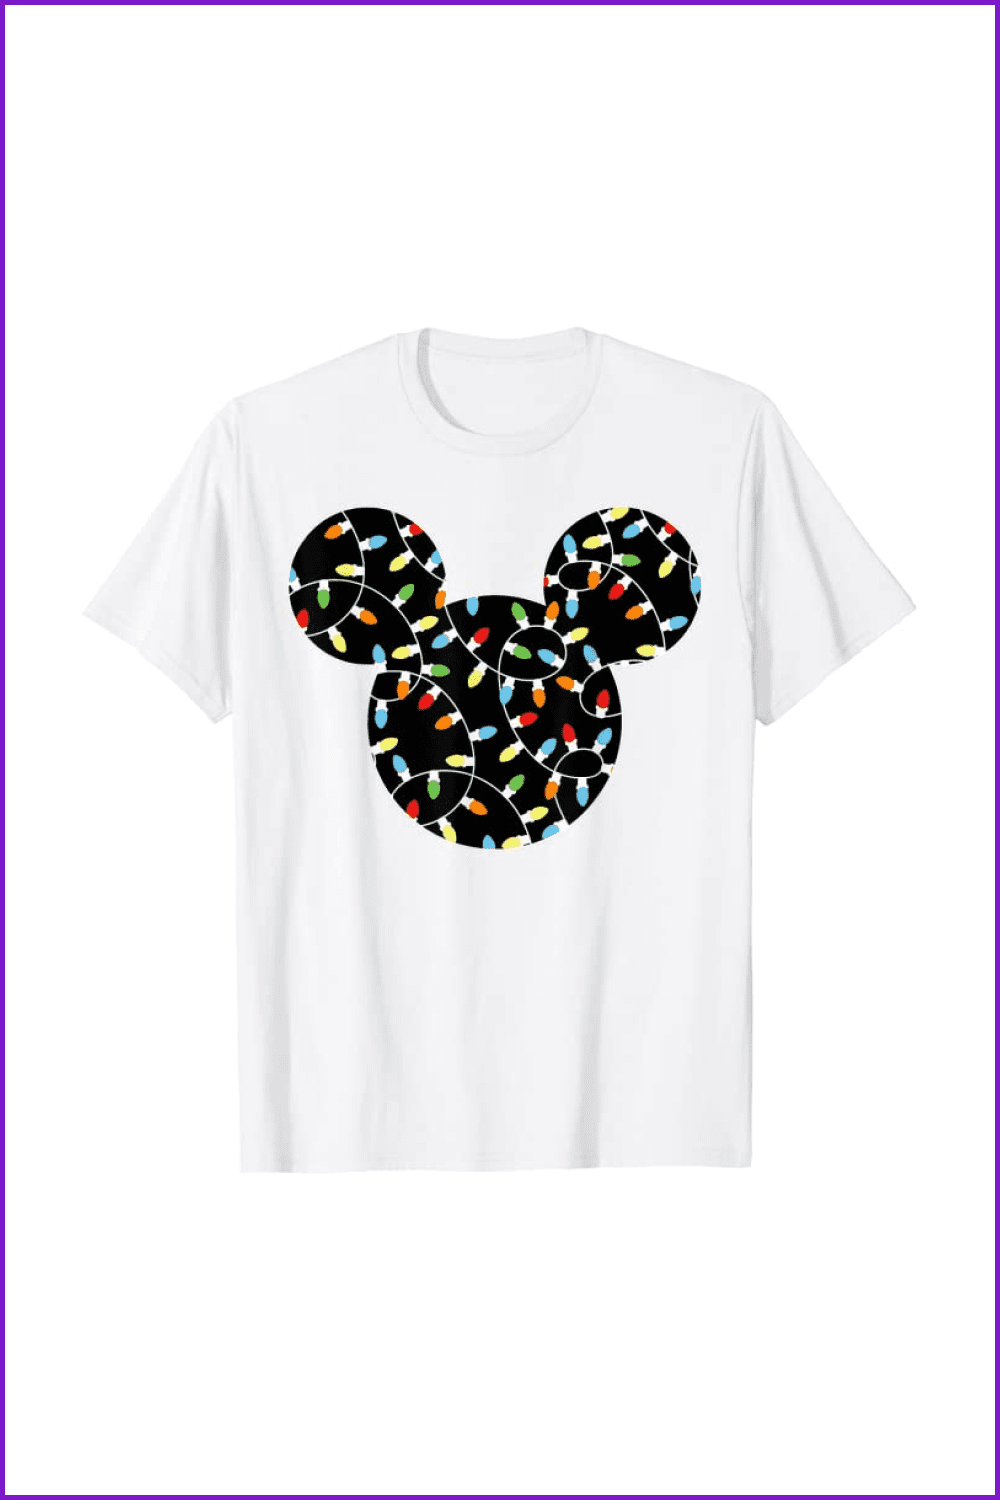 T-shirt with Mickey Mouse's head shape and colorful lights inside of it.